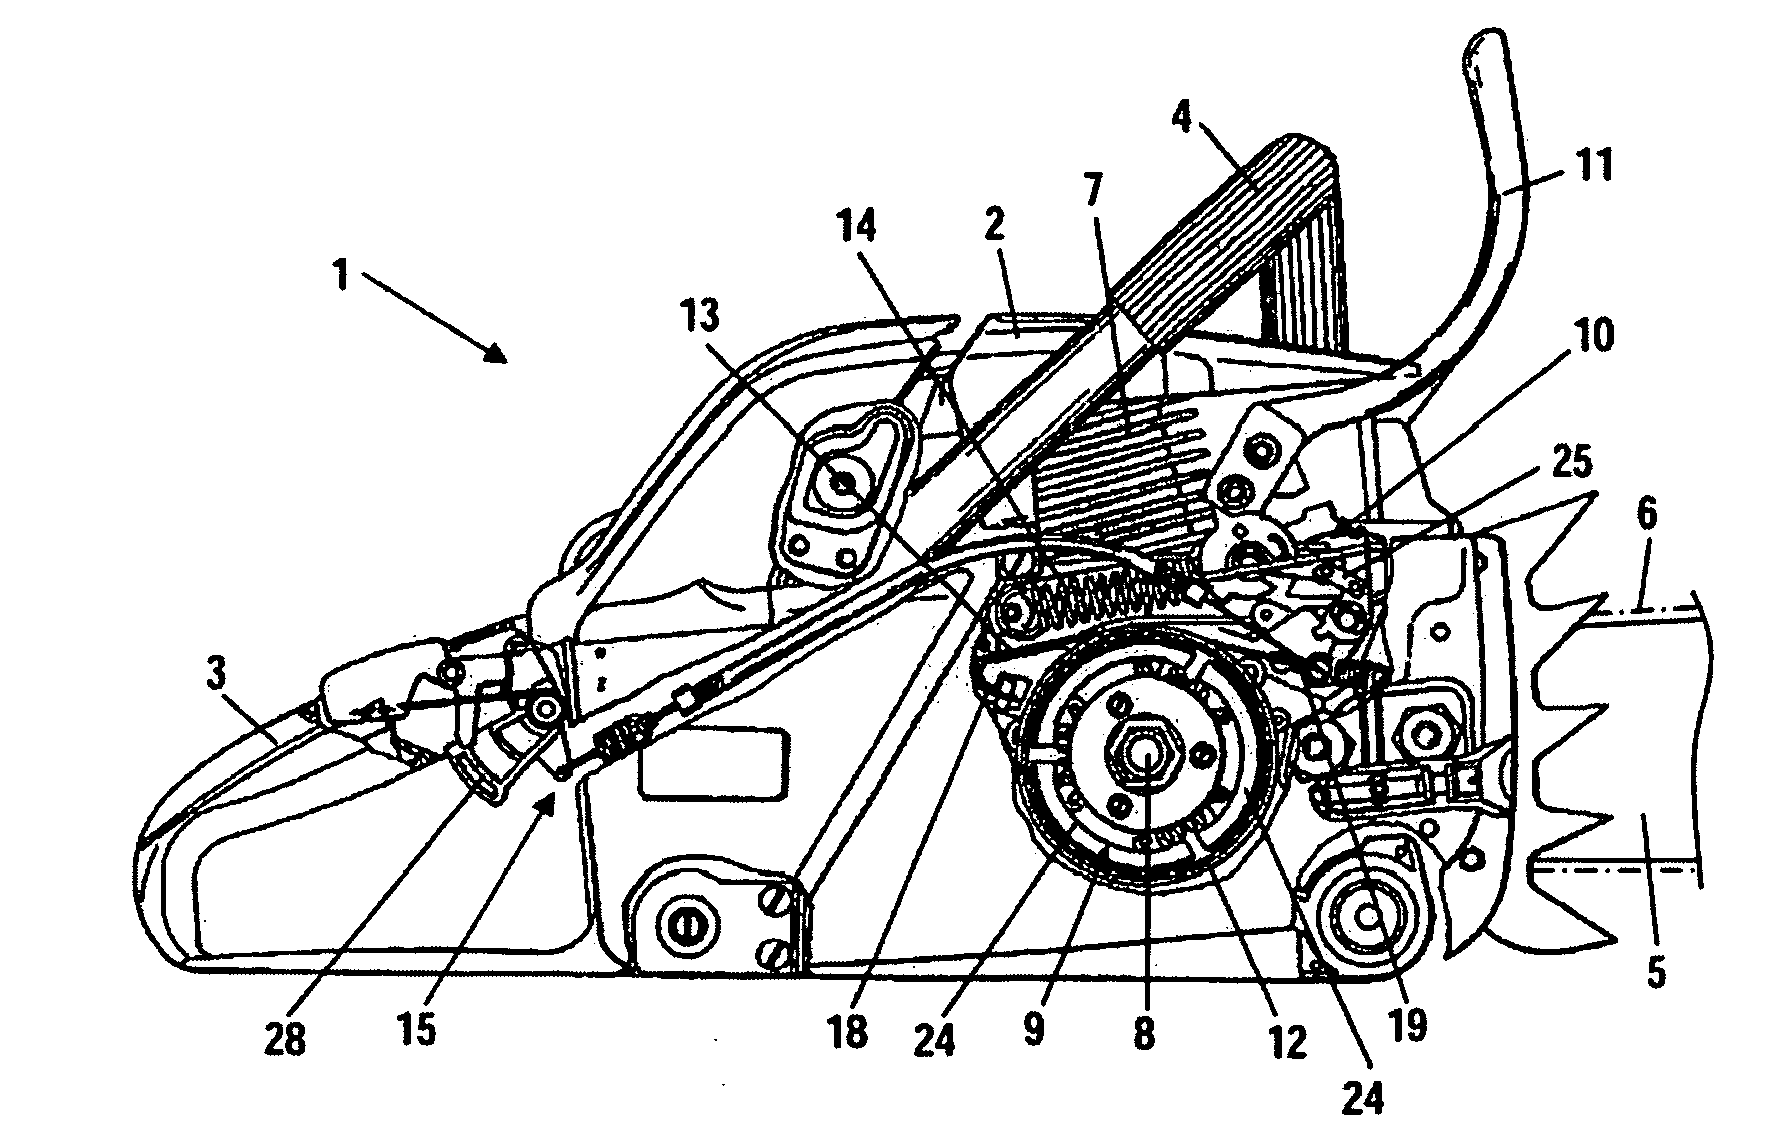 Manually Guided Implement and Method of Producing a Brake Mechanism of a Manually Guided Implement